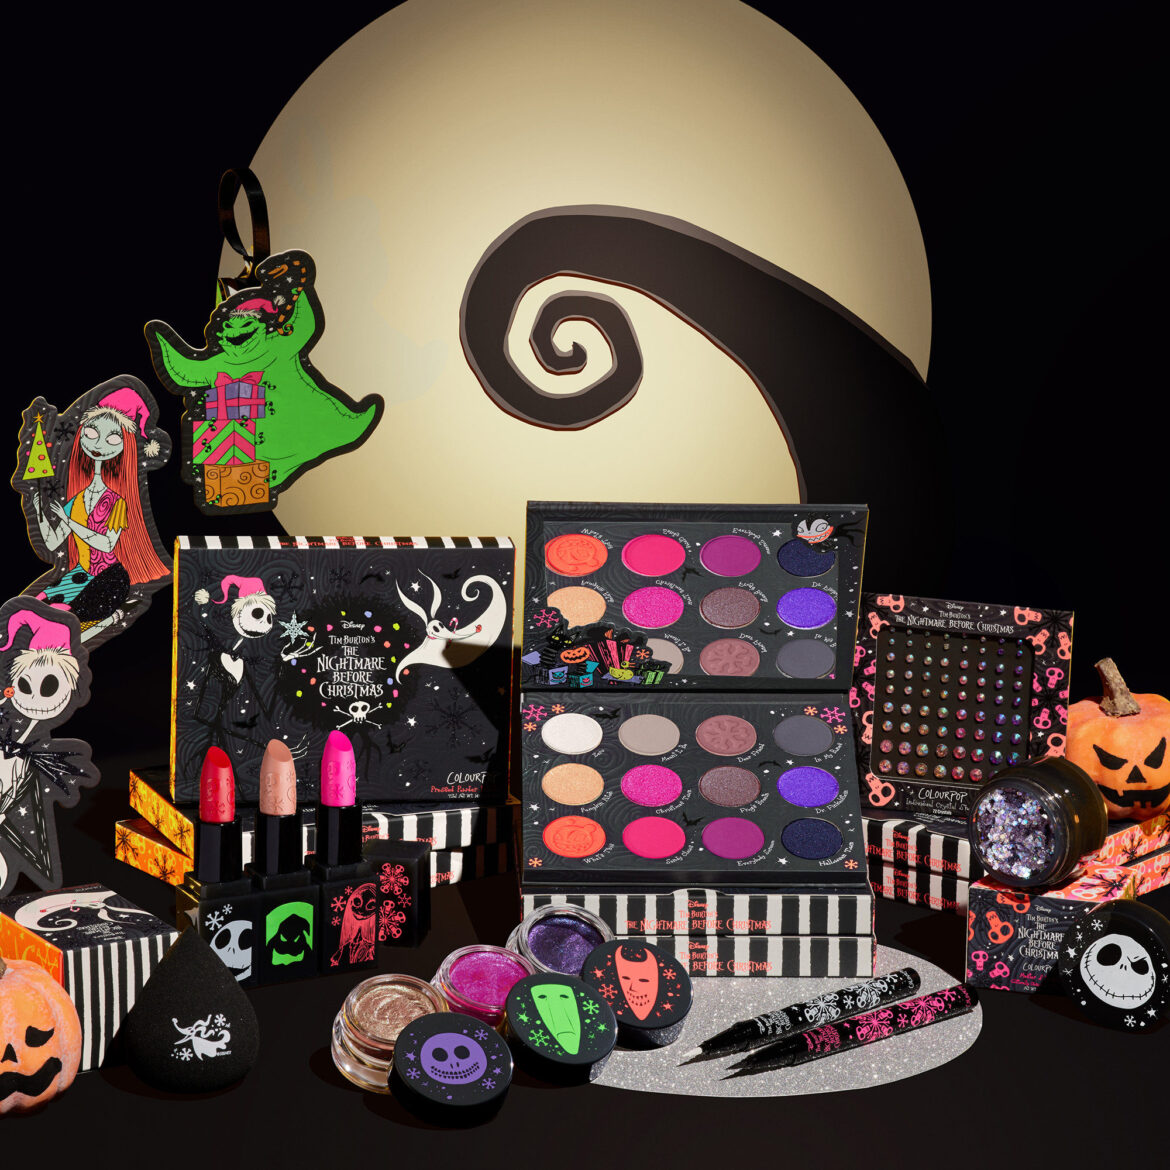 Don’t Be Scared A Nightmare Before Christmas ColourPop Collection Is Coming Soon